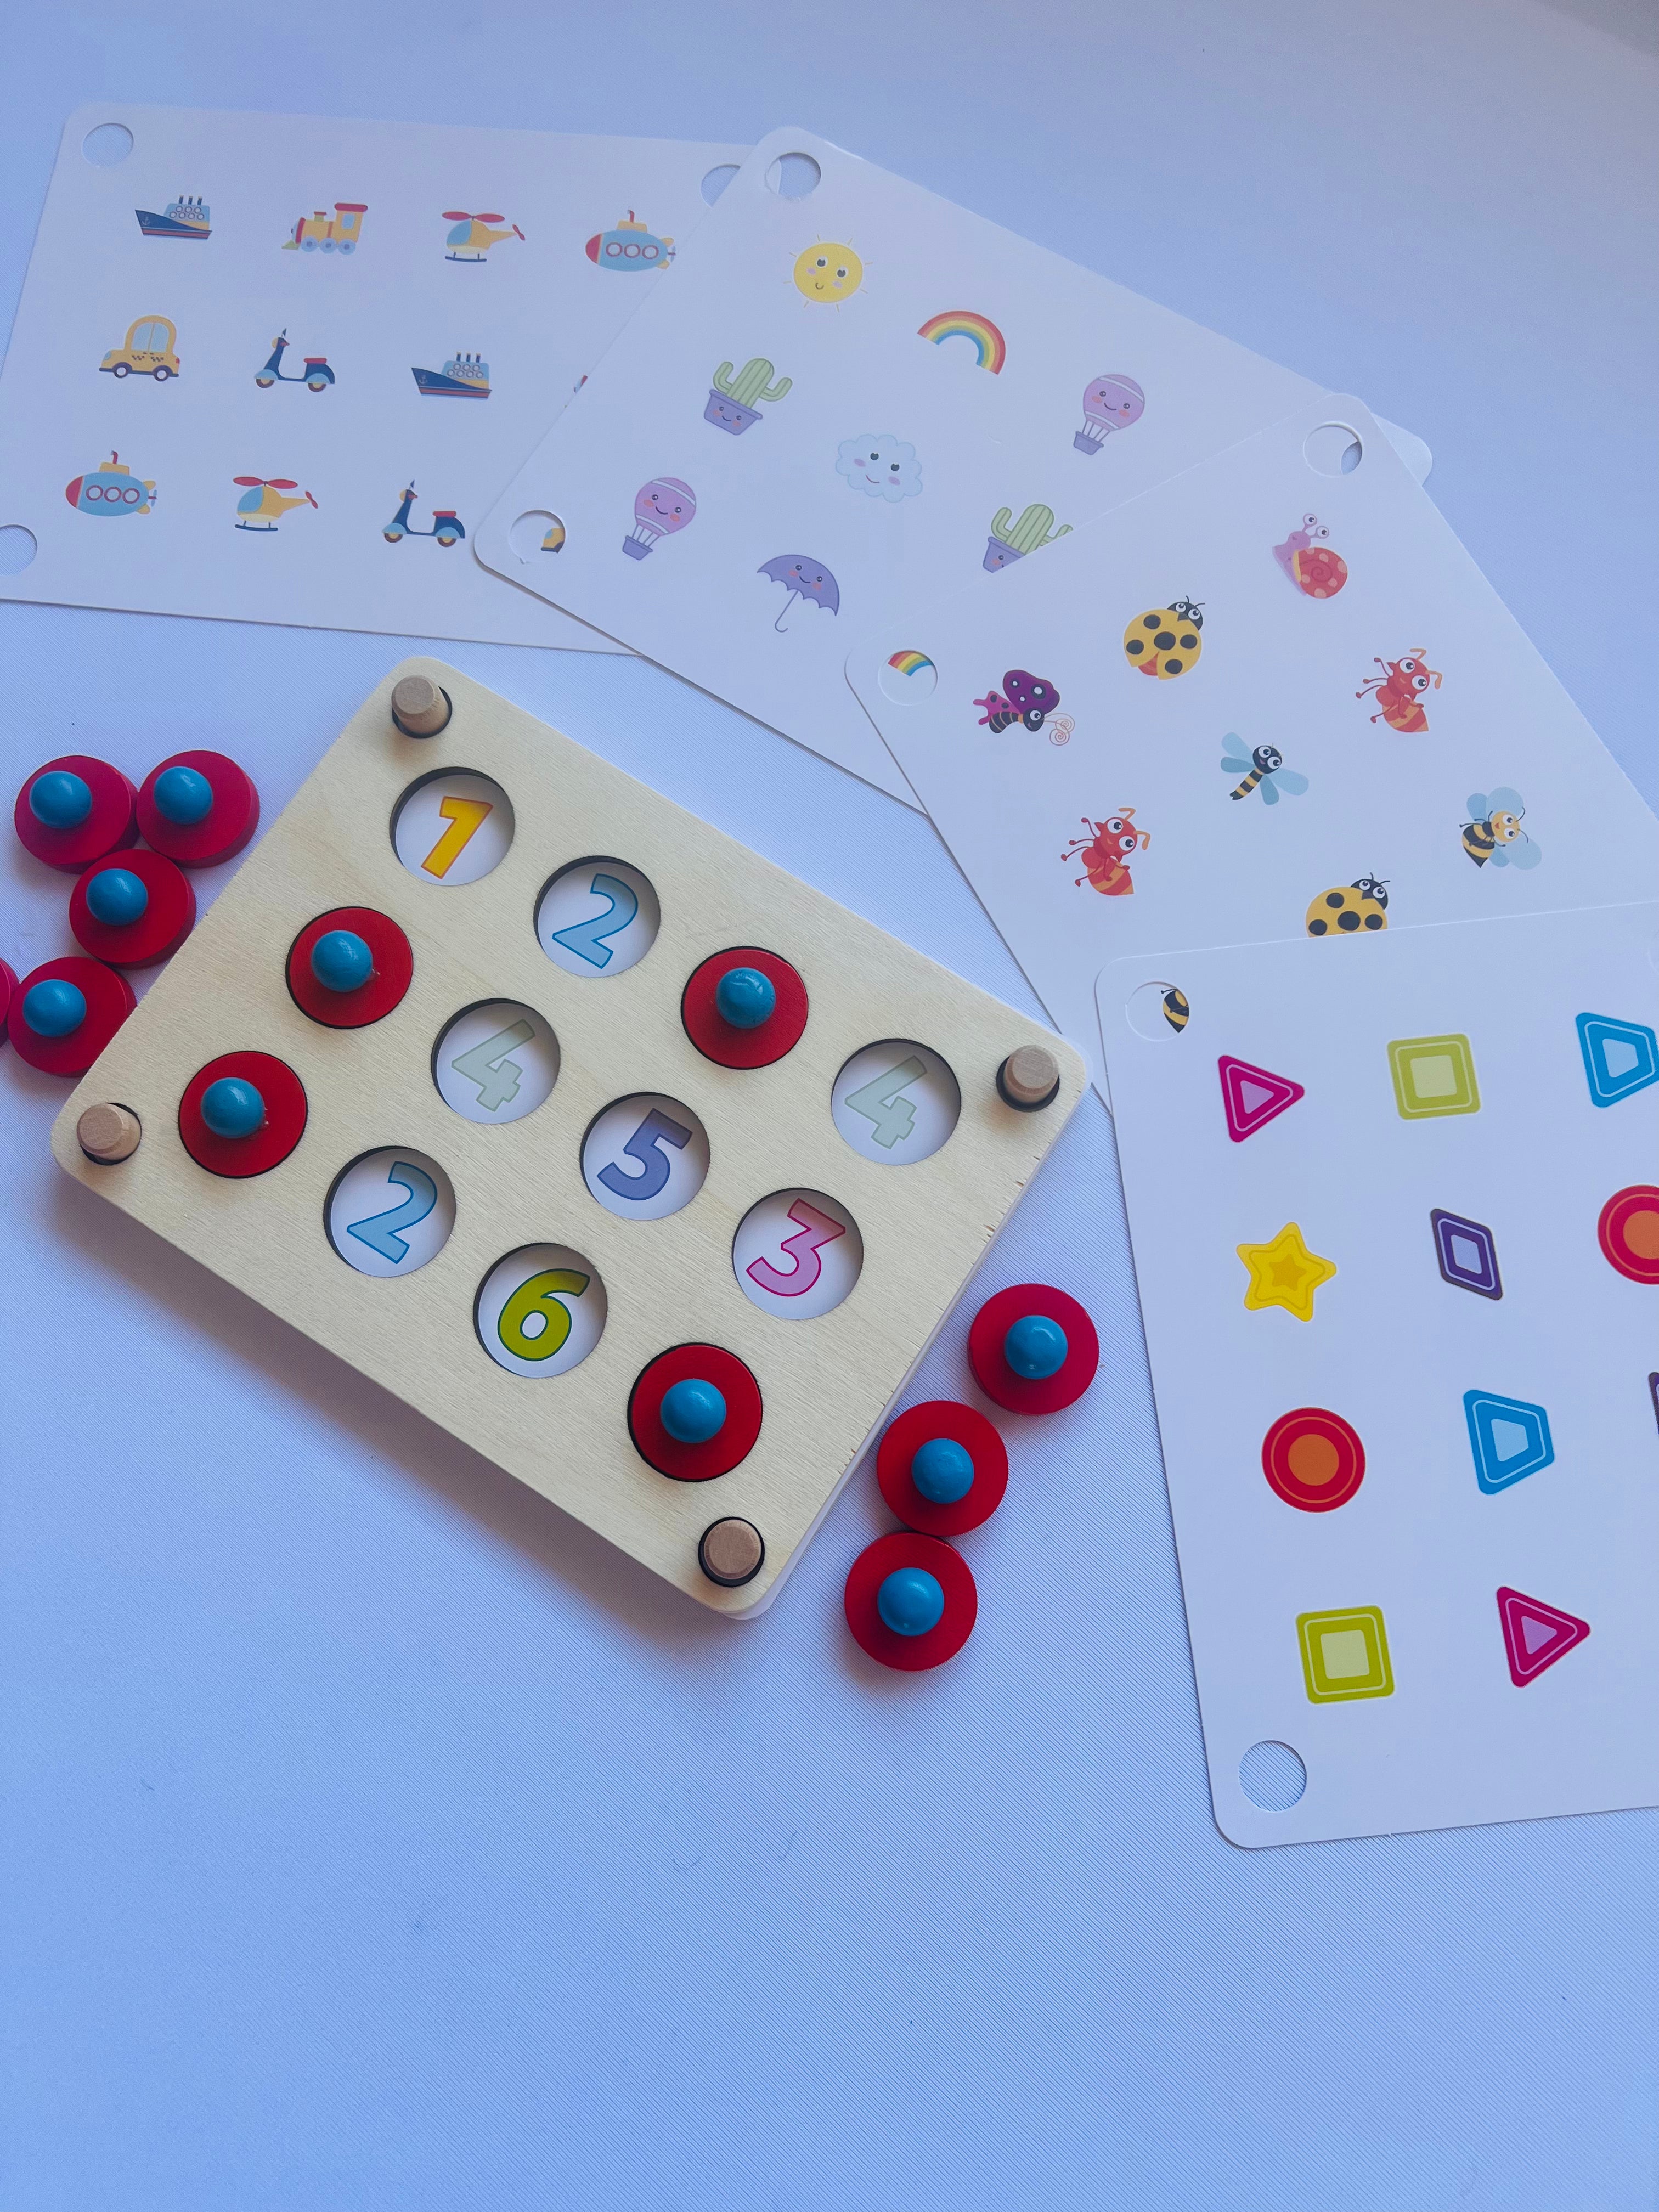 Memory game - Creative mindz - busy bags for busy kids 